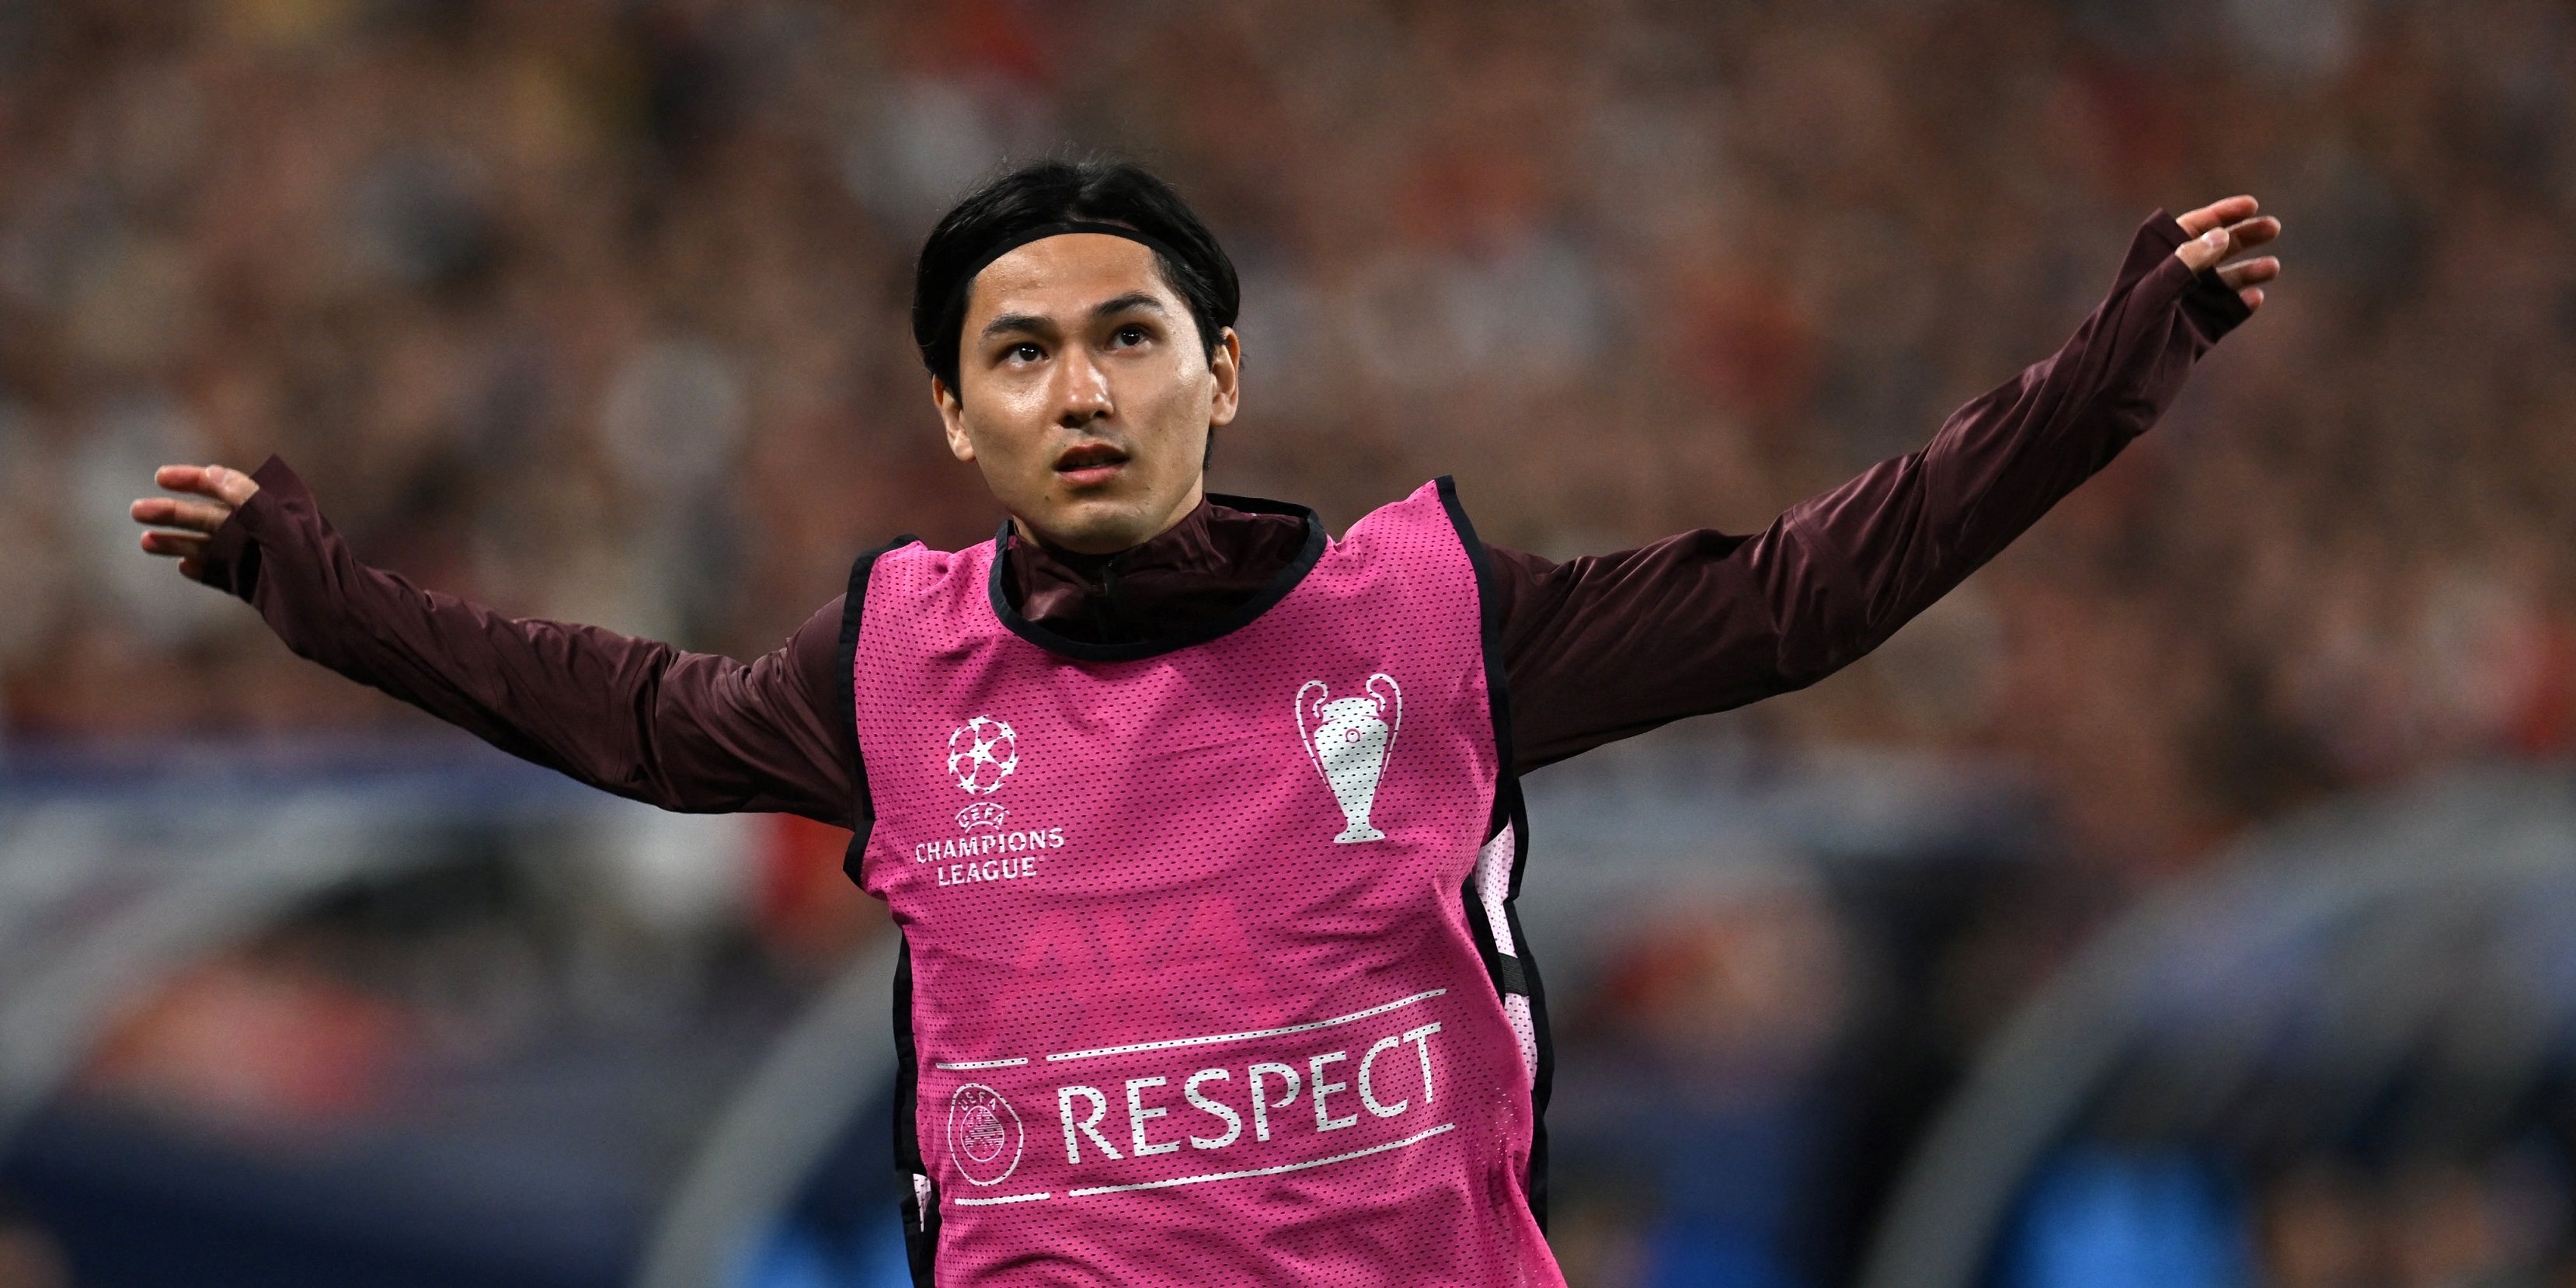 ‘Nobody was really interested’ – Taki Minamino drops biggest hint of potential Liverpool exit with domestic cup comments